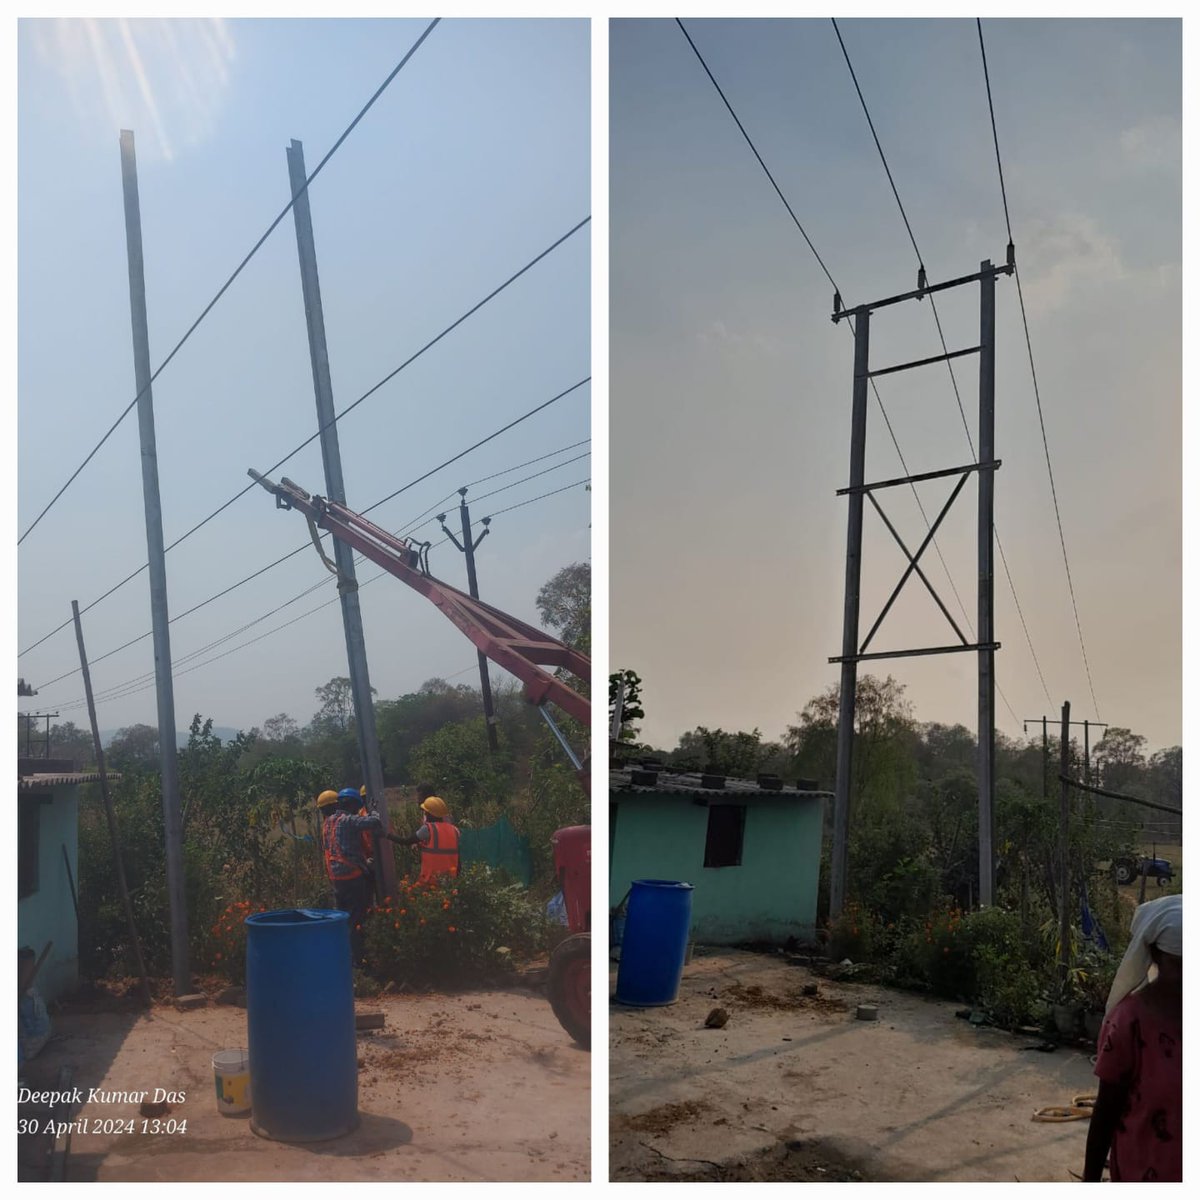 Our team has successfully completed the heightening of the 33KV Koelnagar feeder Line in Hamirpur, Rourkela to address low ground clearance issues. This upgrade will ensure safer operations and improve power supply reliability for consumers in the area.

#ThisIsTataPower